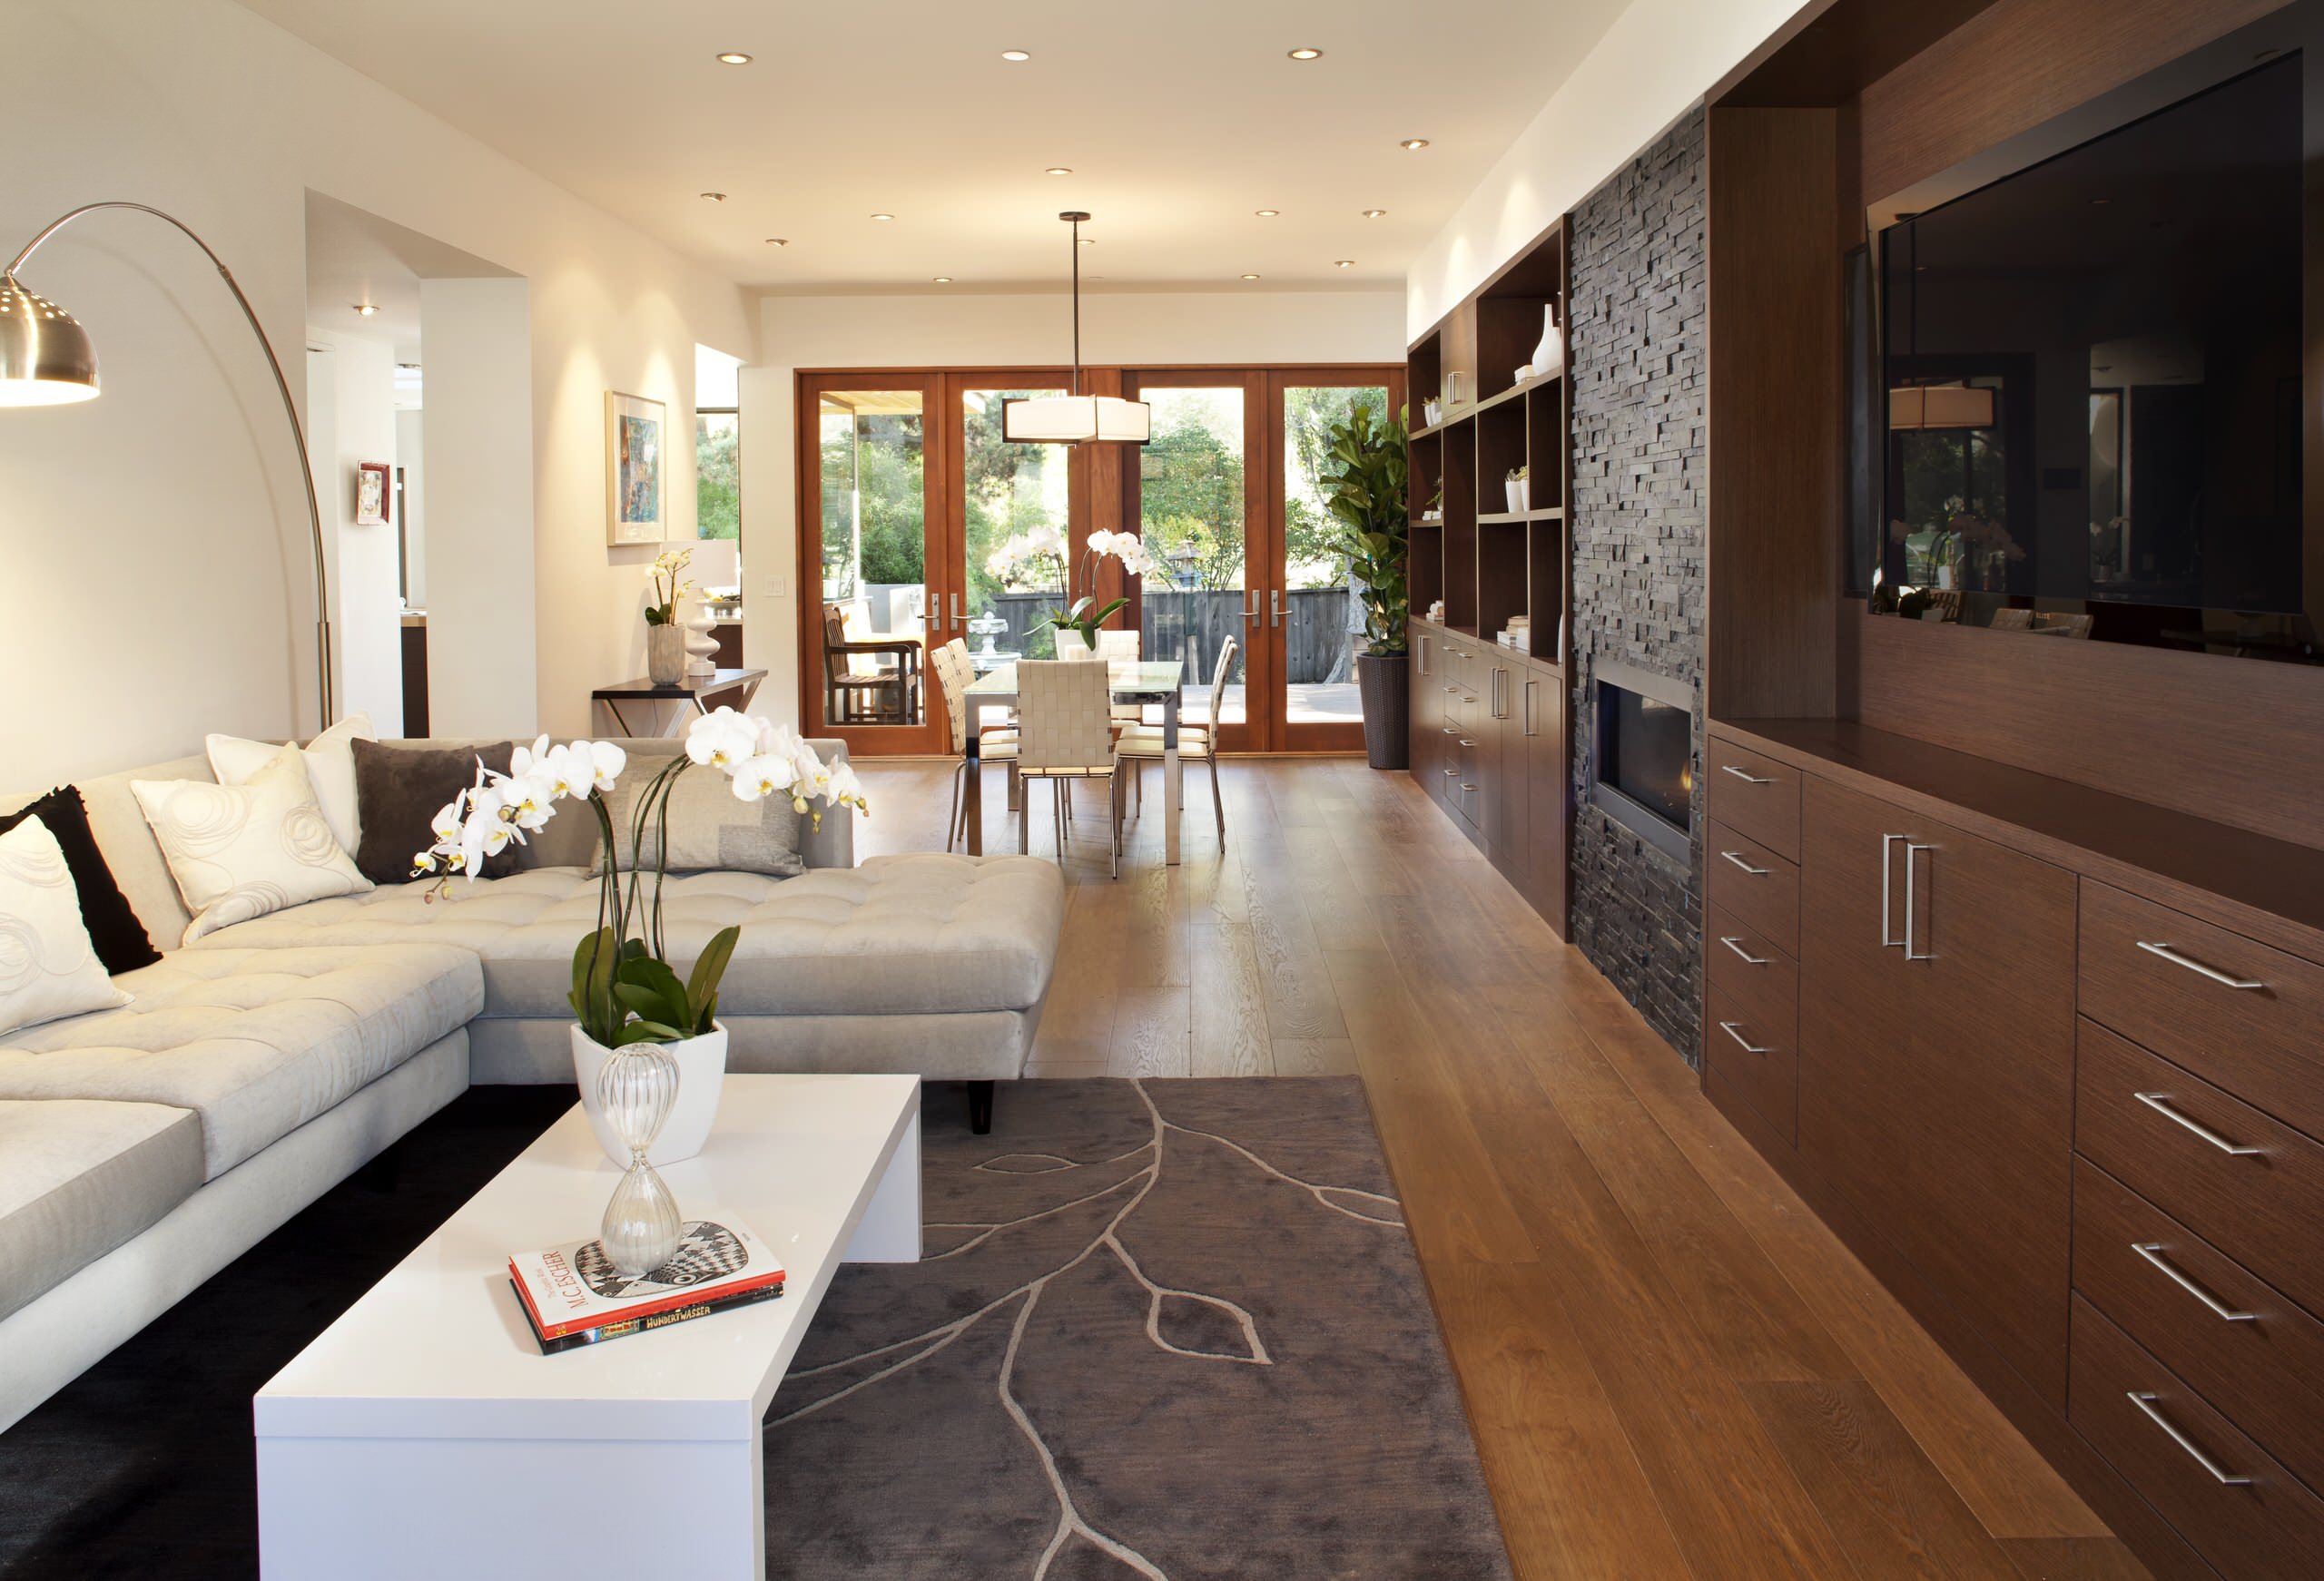 Living Room And Dining Room Combo Family Room Ideas Photos Houzz